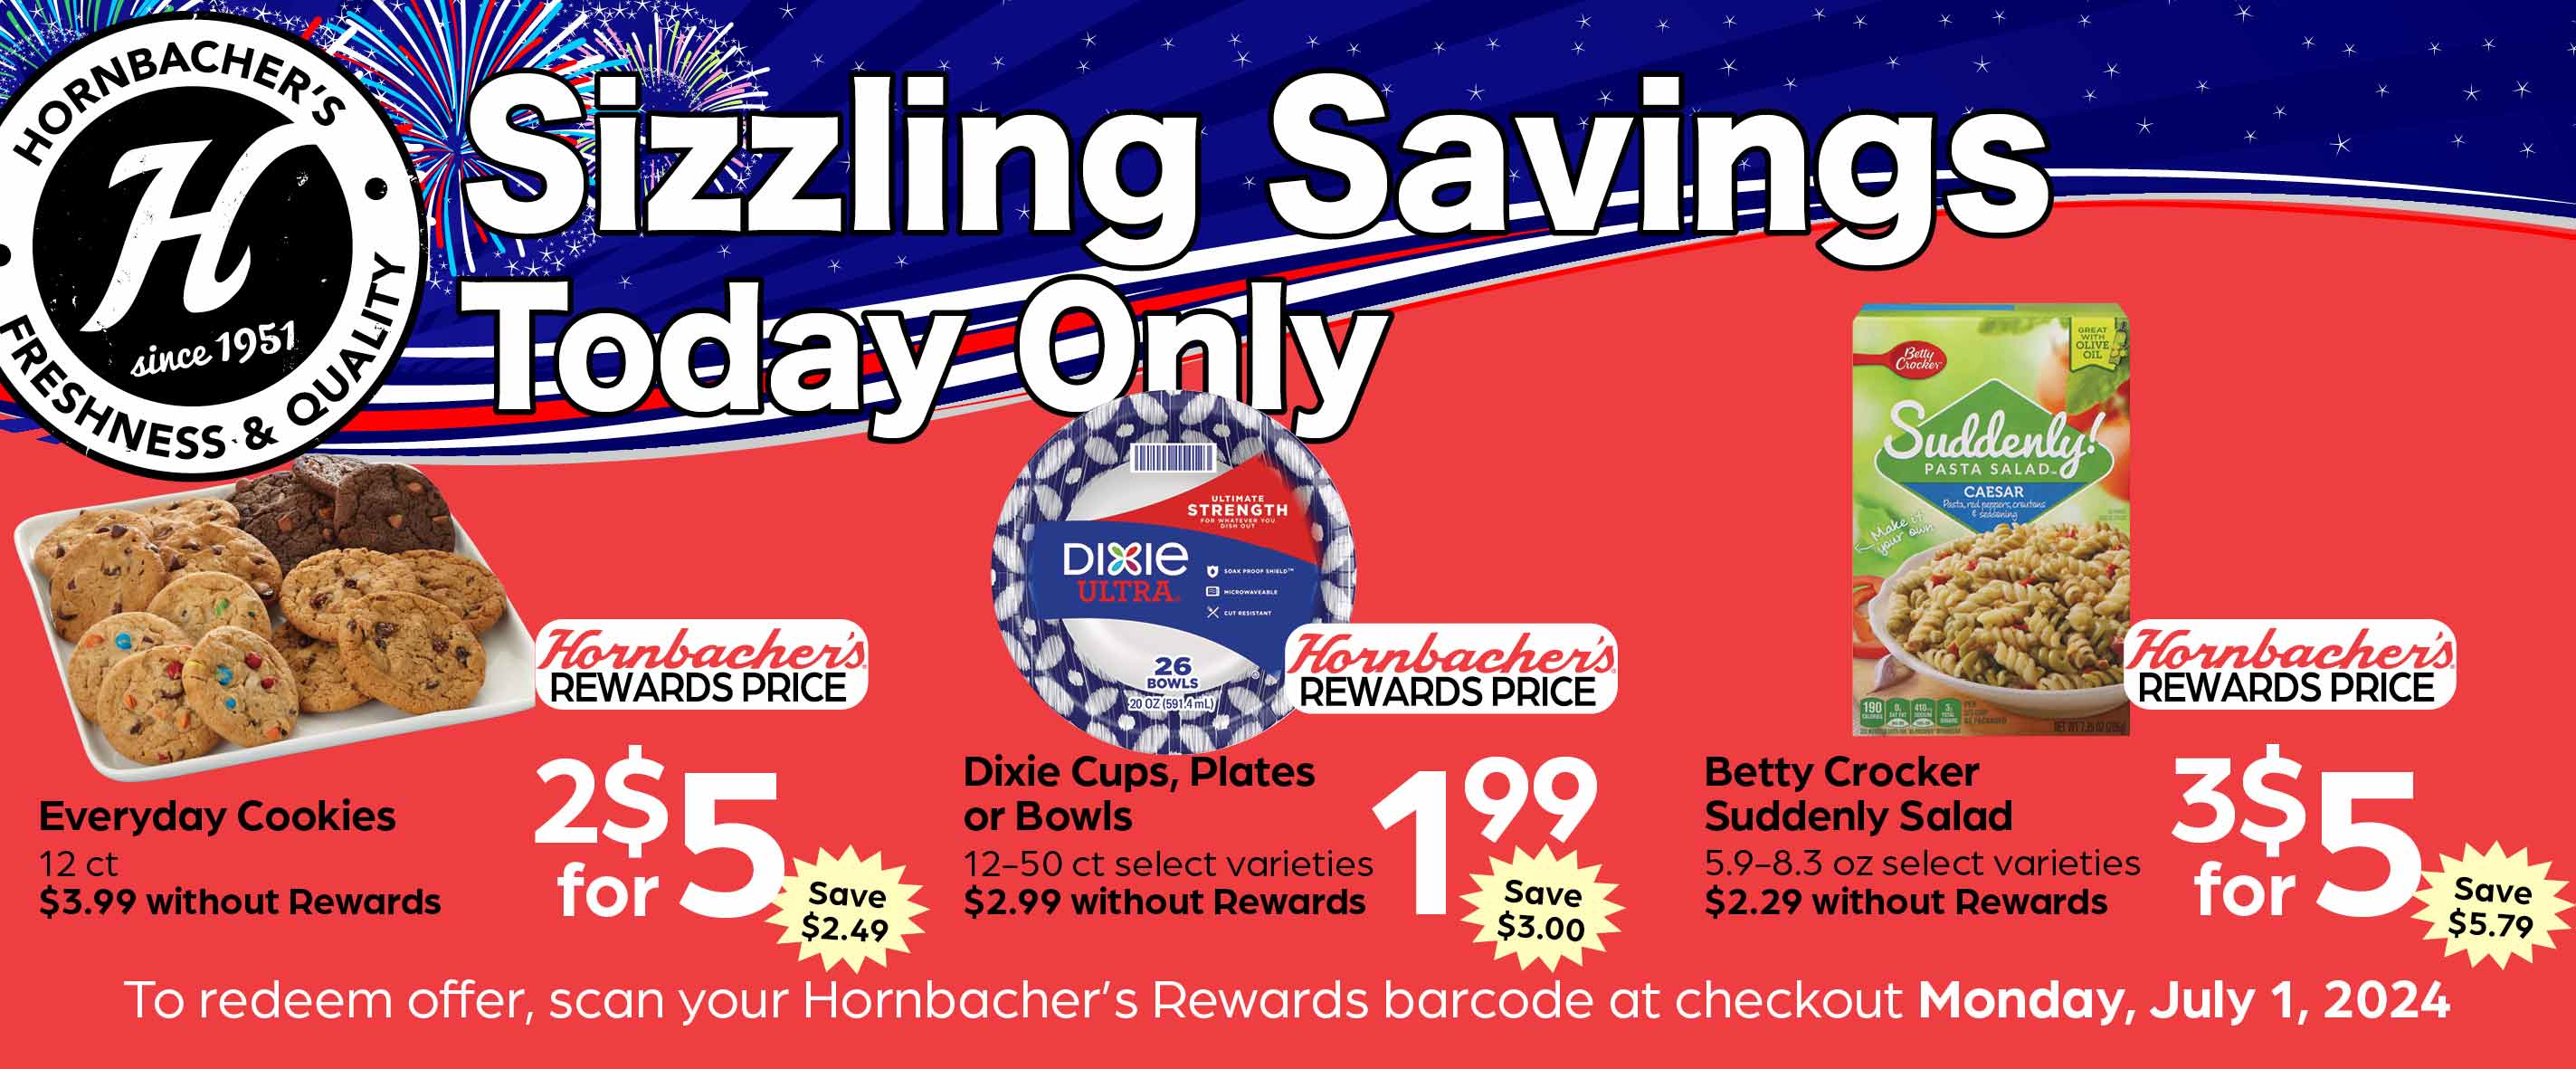 Sizzling Savings - Today Only!